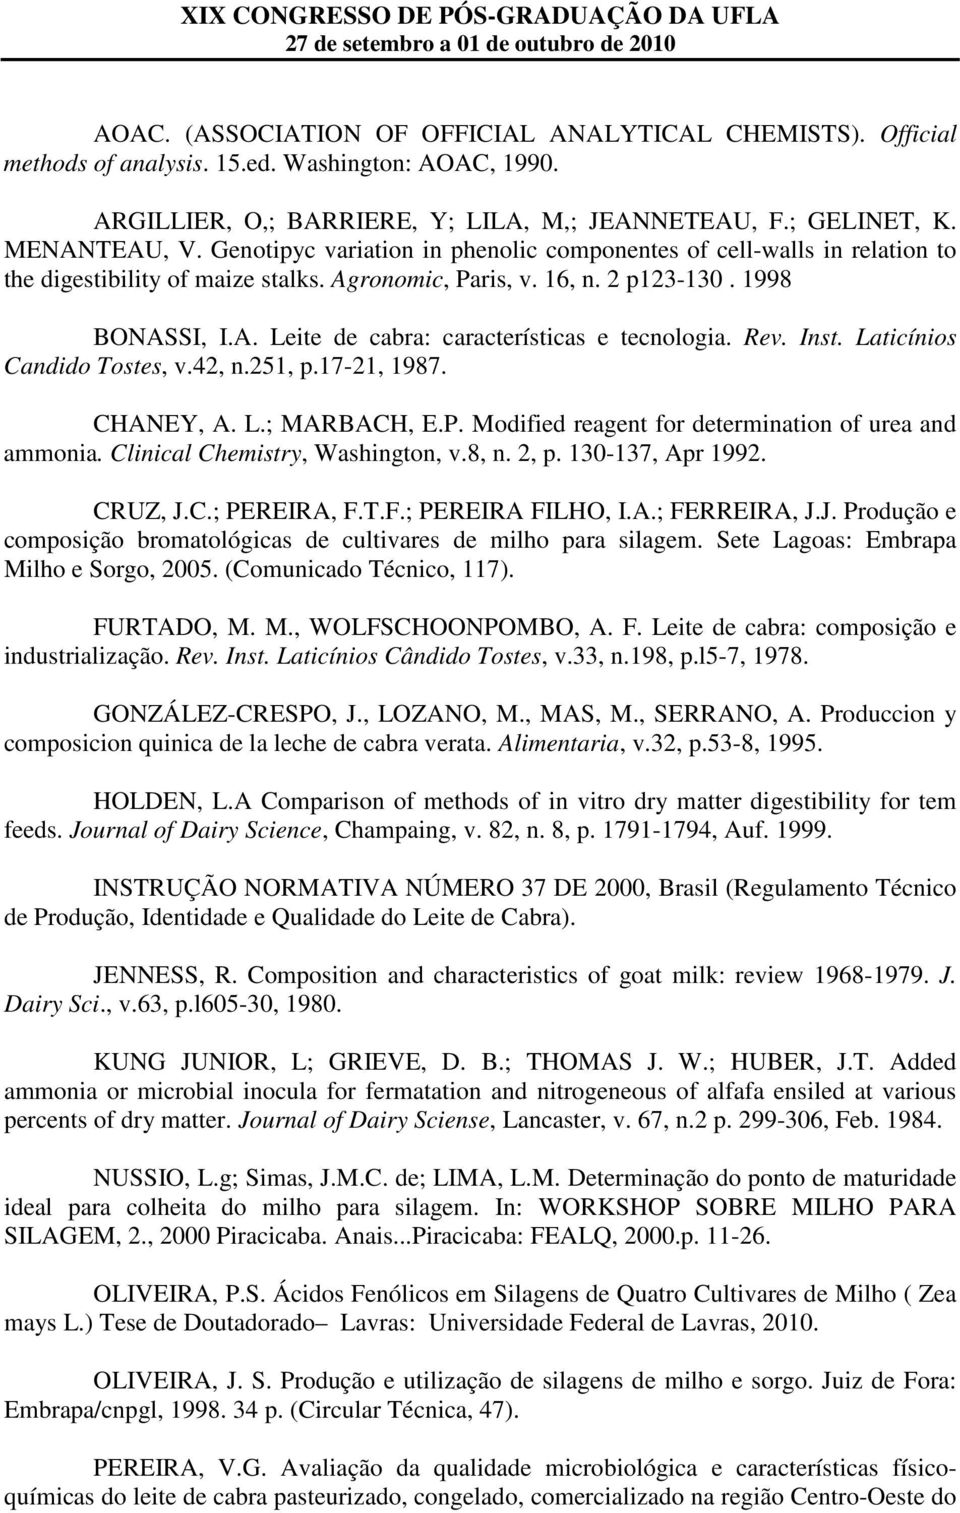 Rev. Inst. Laticínios Candido Tostes, v.42, n.251, p.17-21, 1987. CHANEY, A. L.; MARBACH, E.P. Modified reagent for determination of urea and ammonia. Clinical Chemistry, Washington, v.8, n. 2, p.